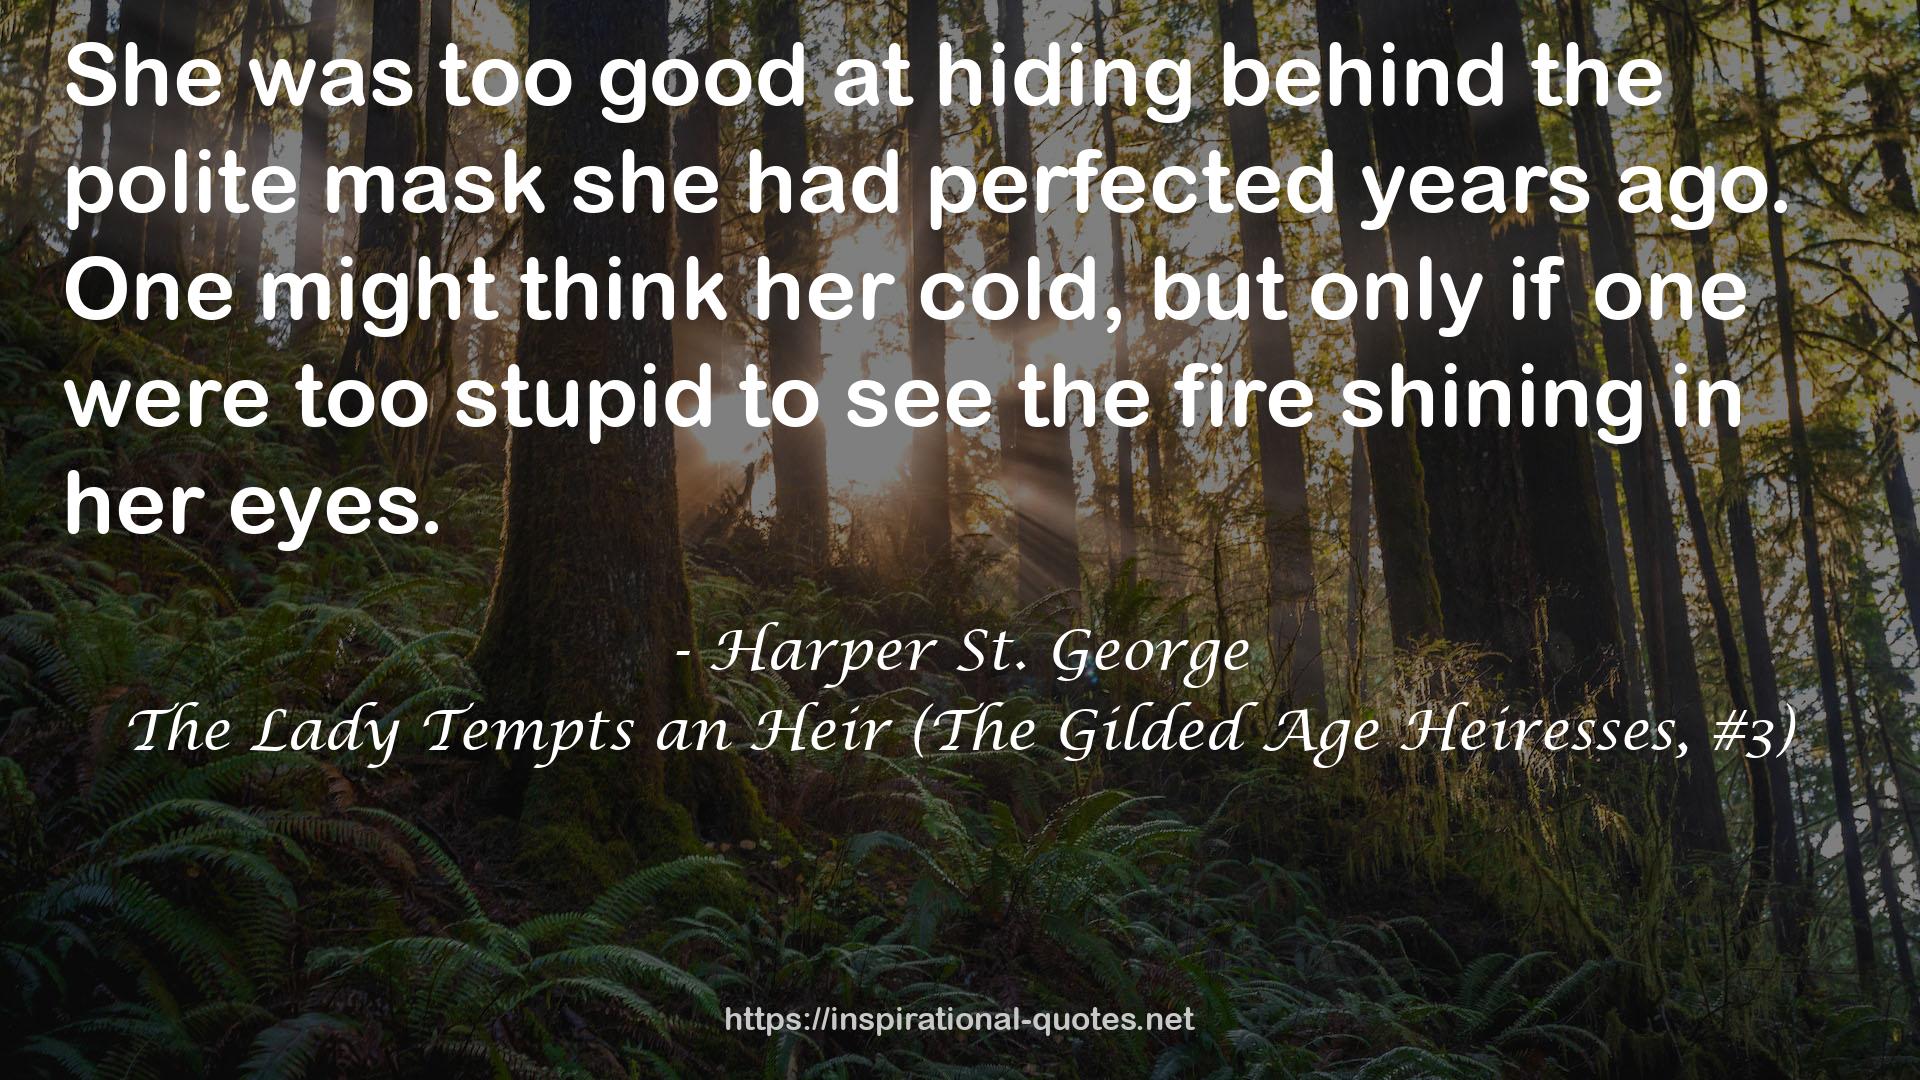 The Lady Tempts an Heir (The Gilded Age Heiresses, #3) QUOTES